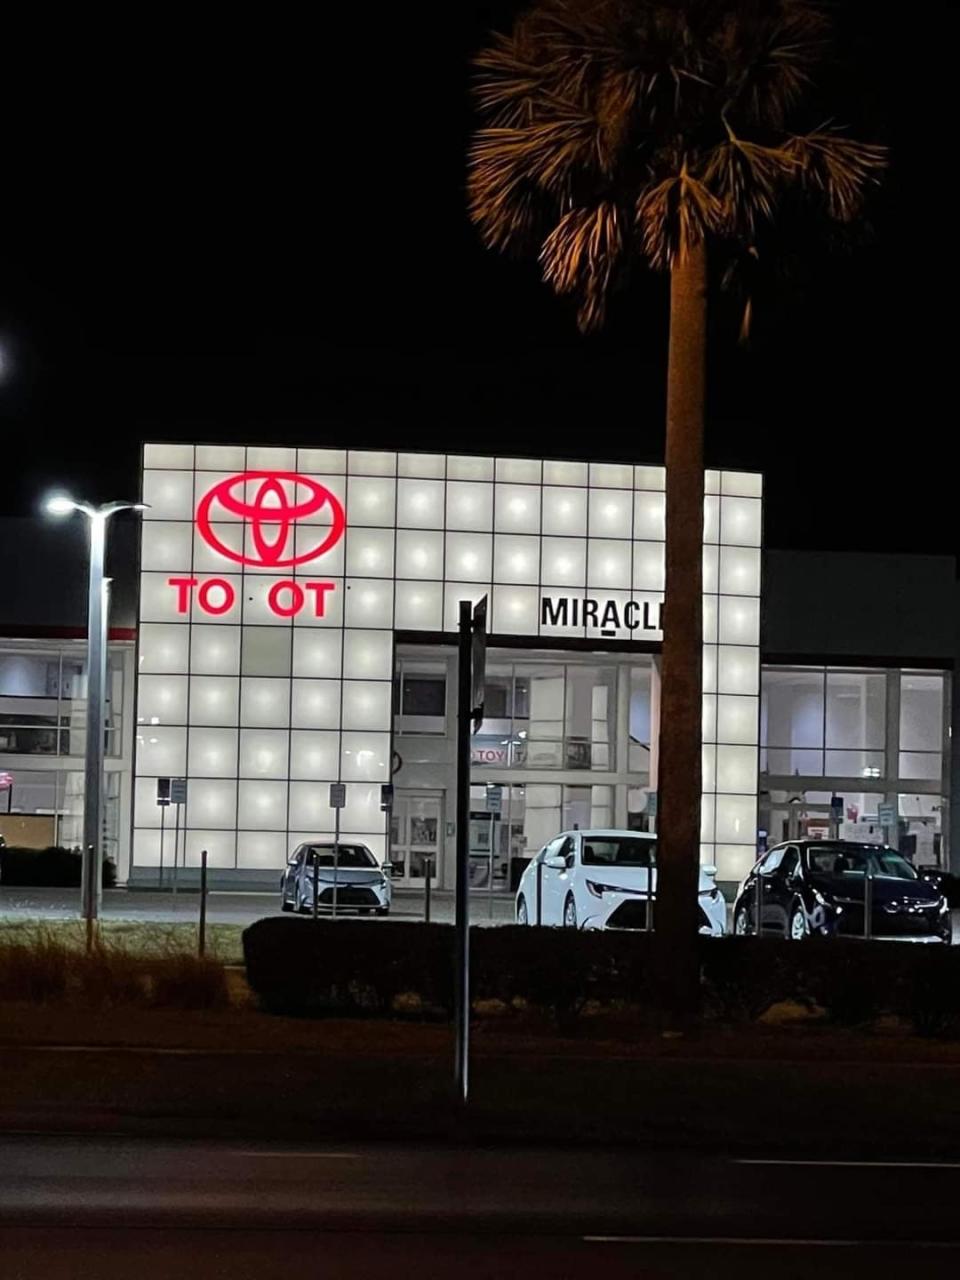 Toyota dealership sign with burnt out letters that spell 